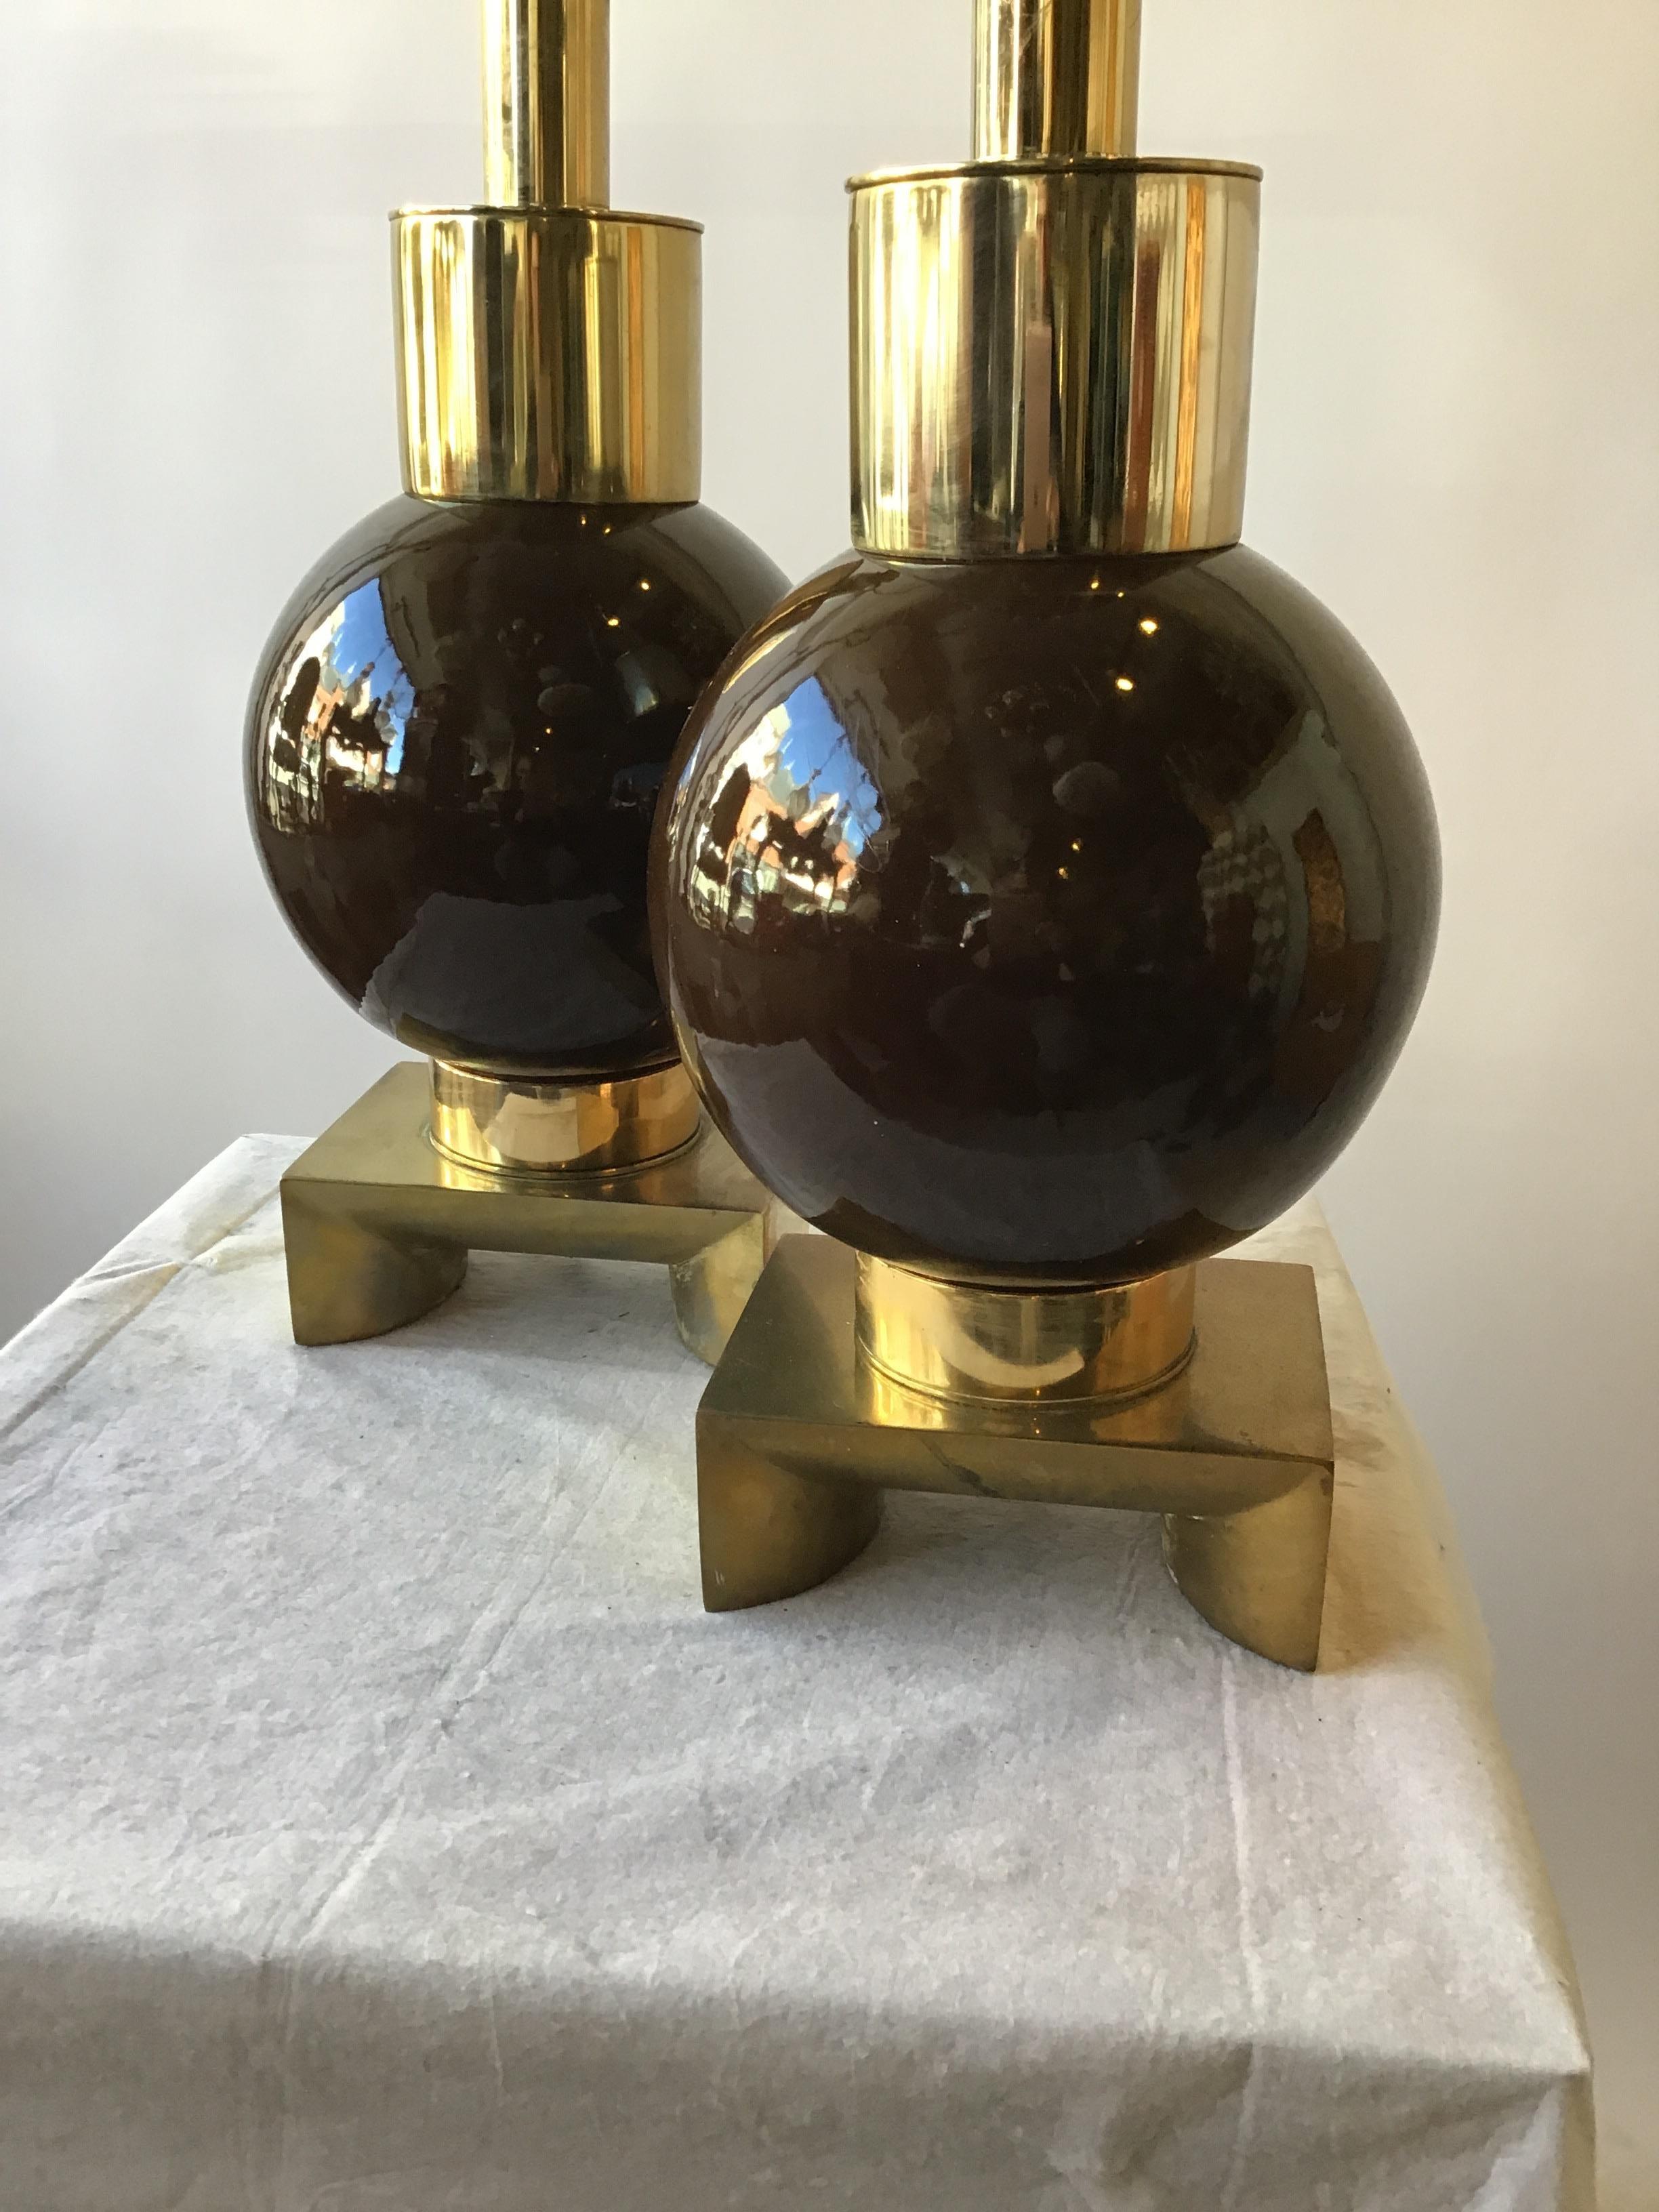 Pair of 1970s ceramic ball shaped lamps on brass bases. Made by Laurel. Super chic.